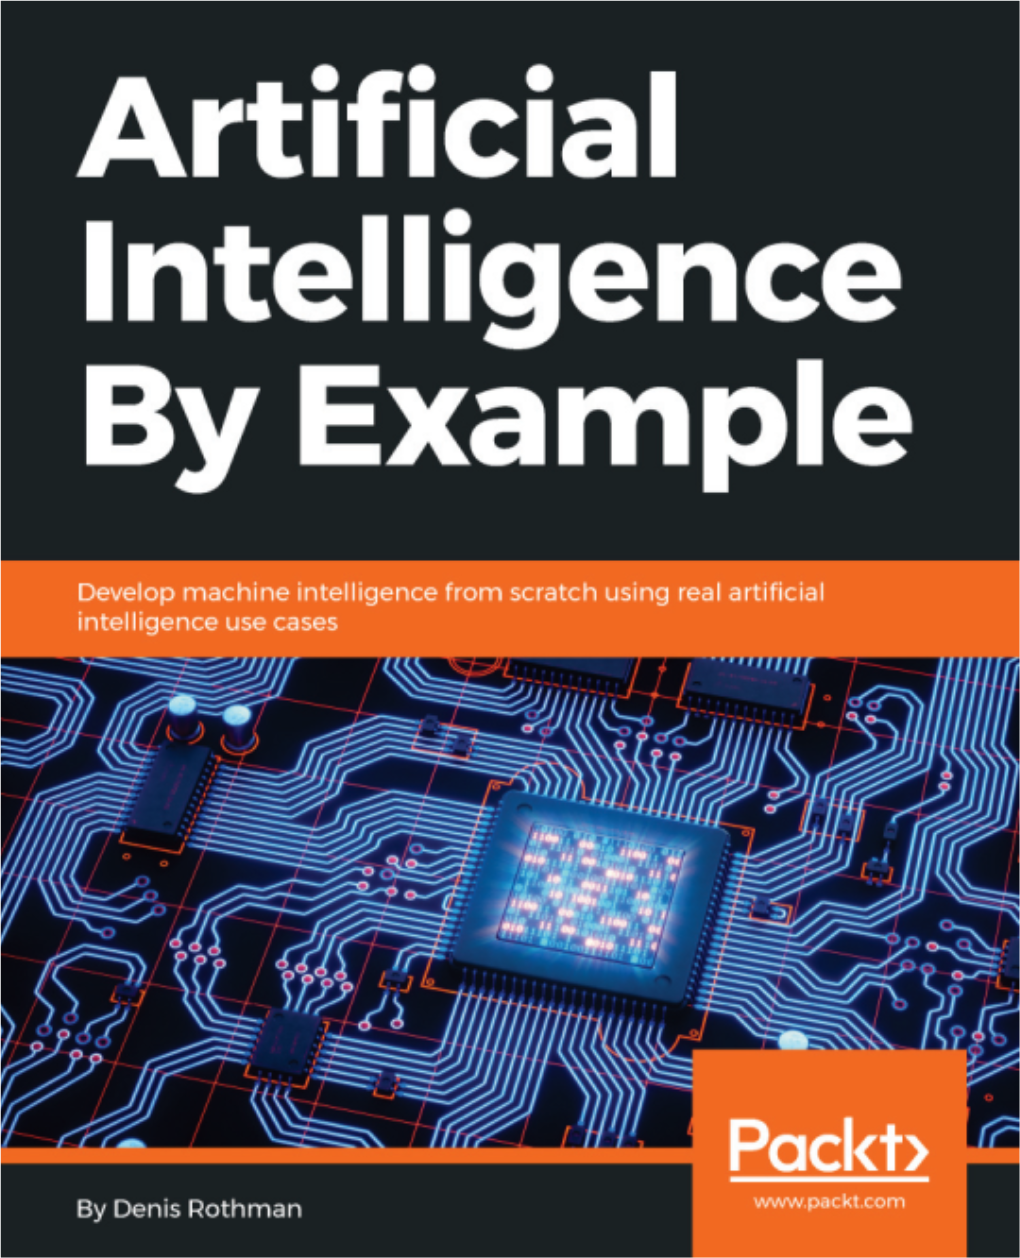 Artificial Intelligence by Example Copyright a 2018 Packt Publishing